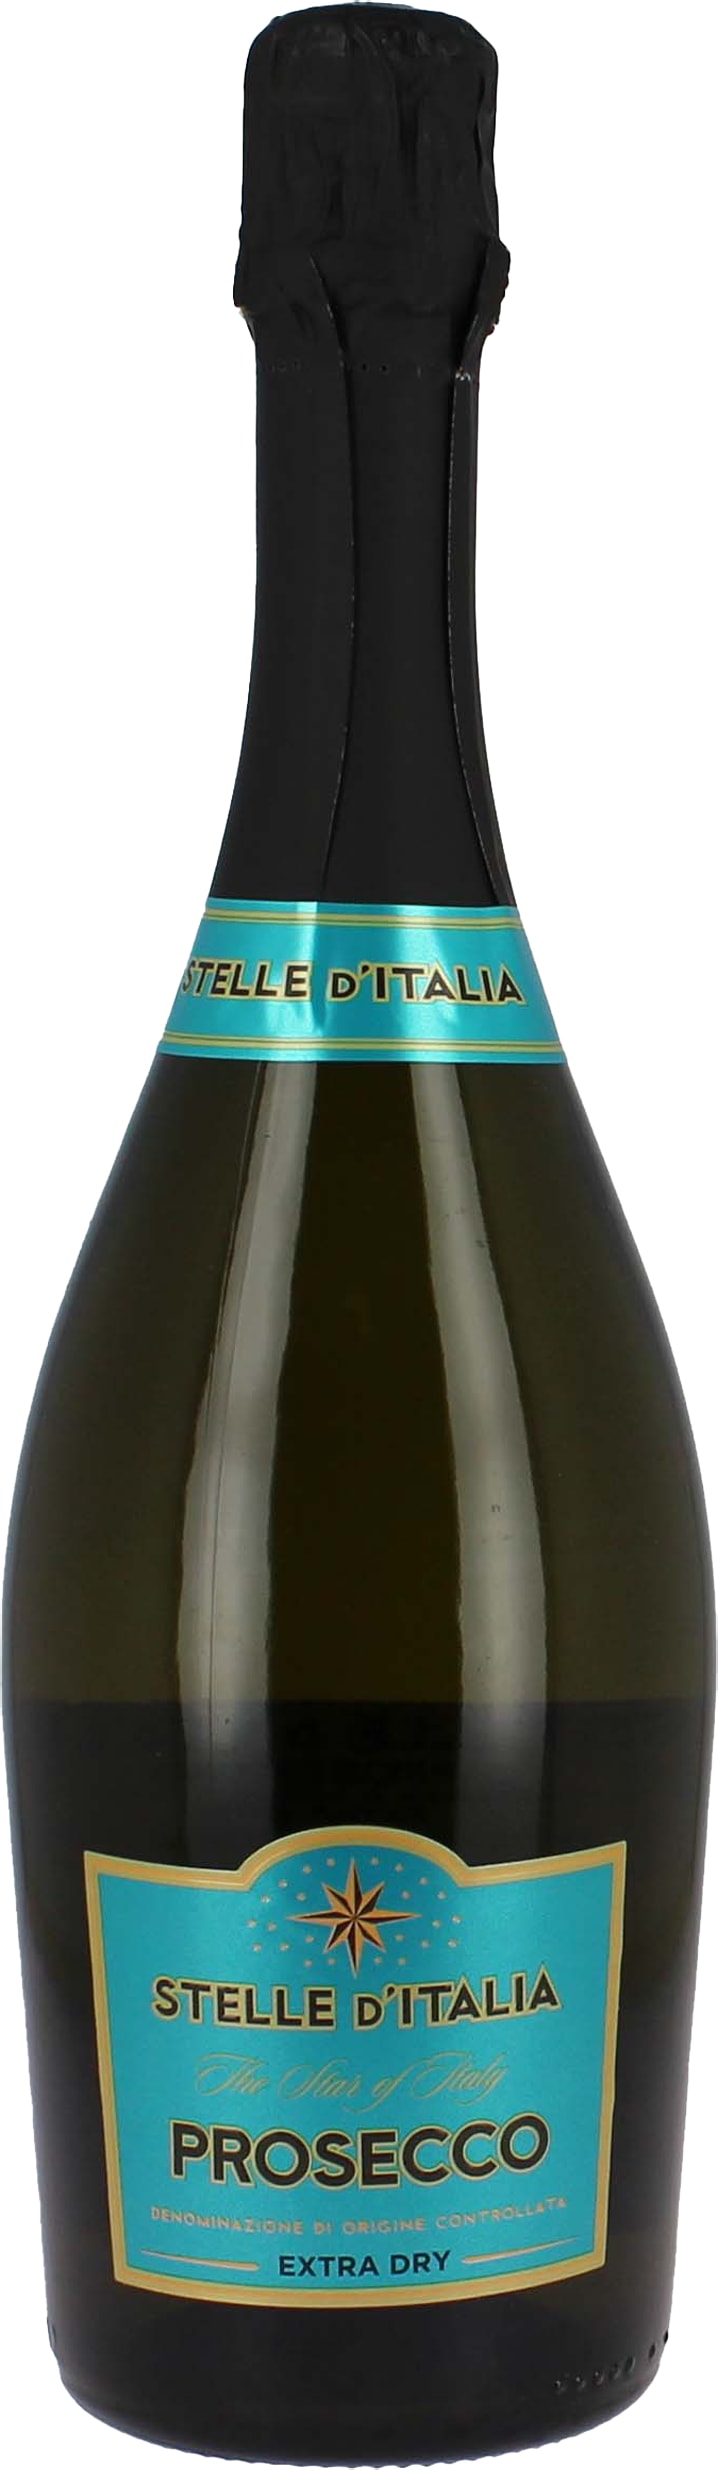 Stelle d'Italia Prosecco 75cl NV - Buy Stelle d'Italia Wines from GREAT WINES DIRECT wine shop